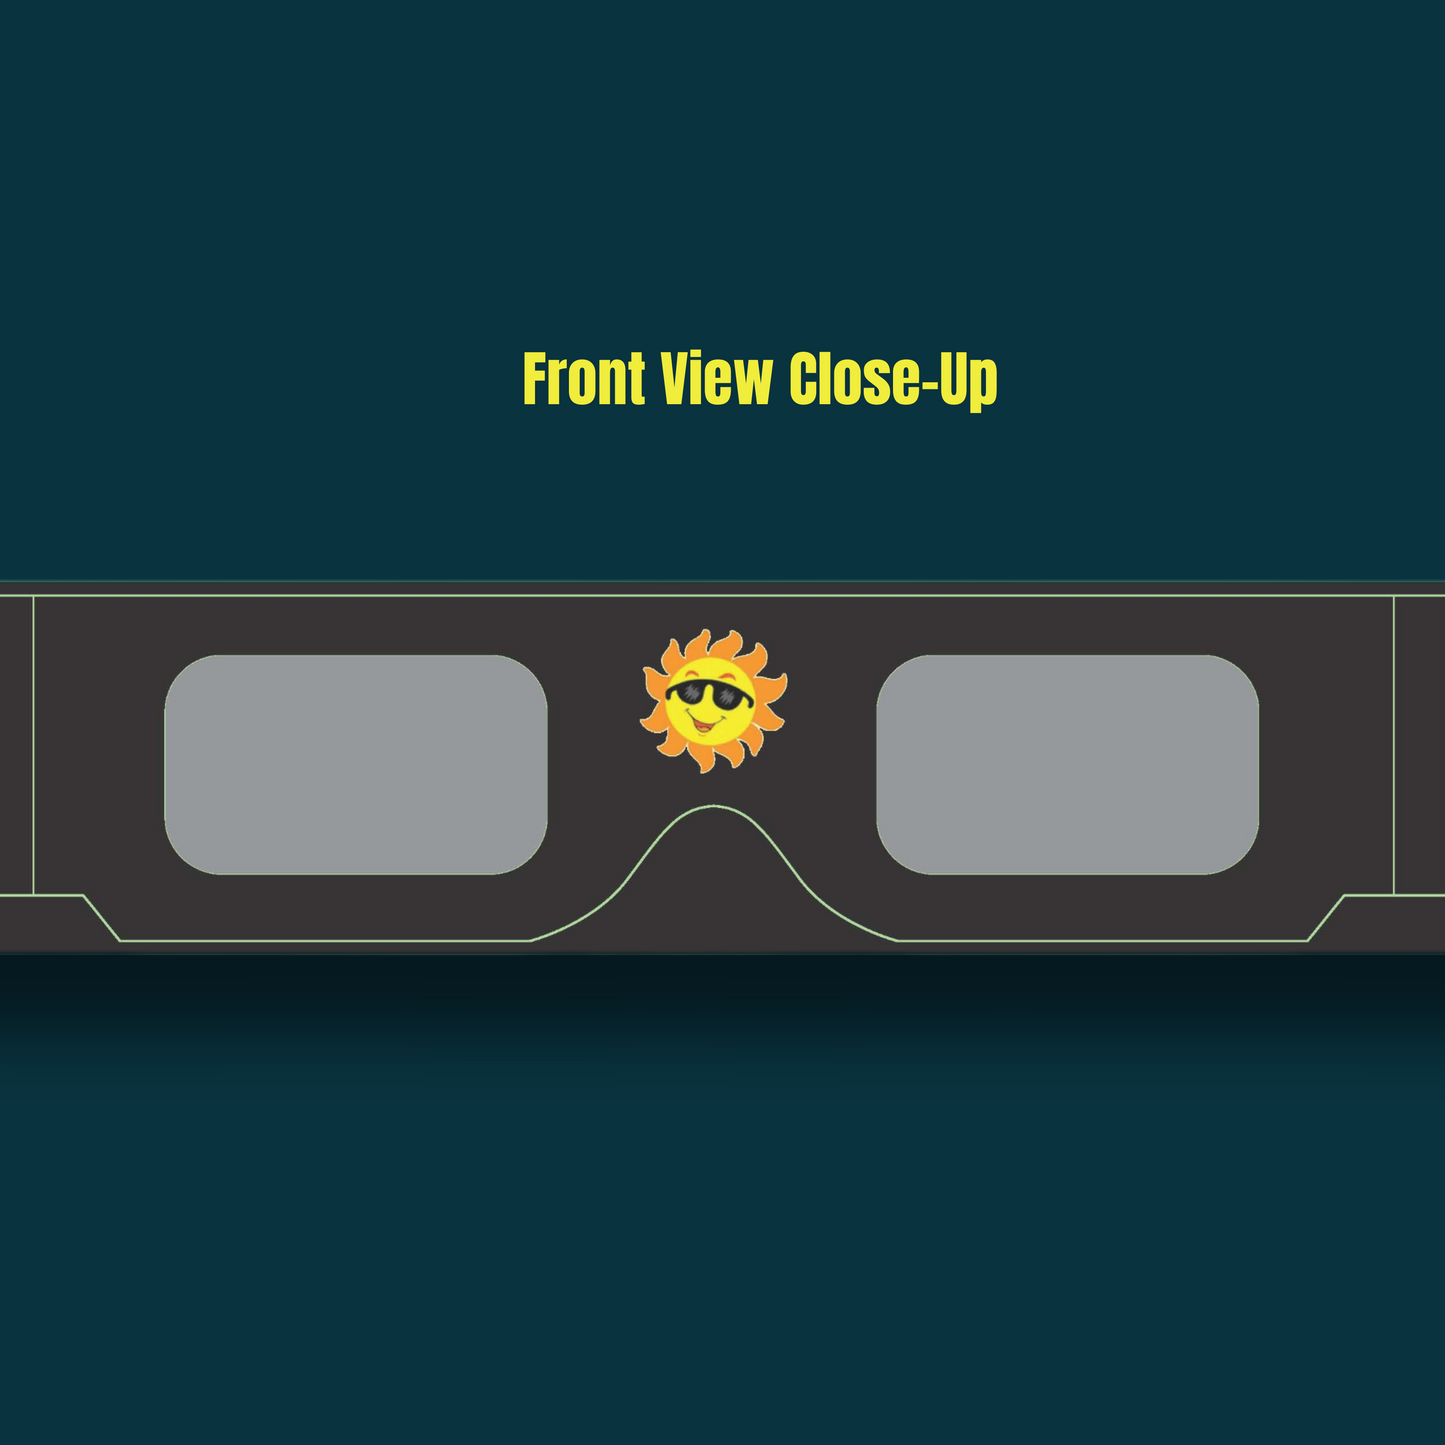 Solar Eclipse Glasses 1 for $3 or 2 for $5